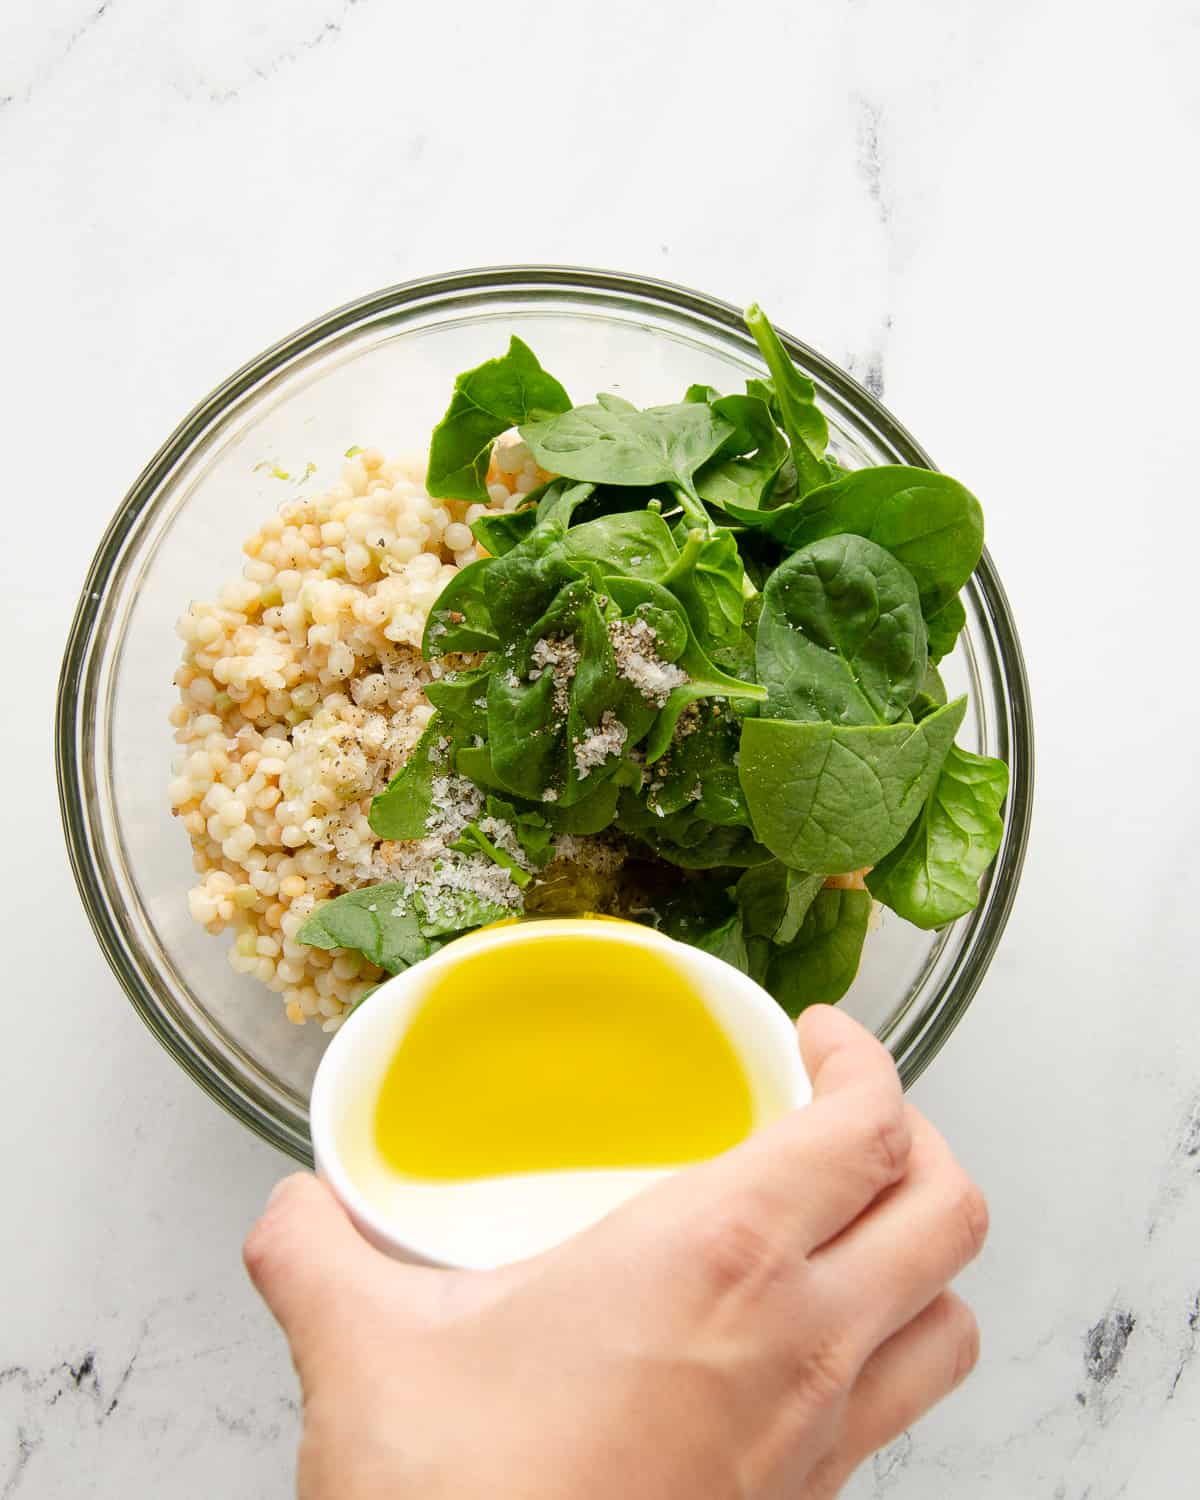 A hand pouring olive oil into a glass bowl with couscous and spinach.